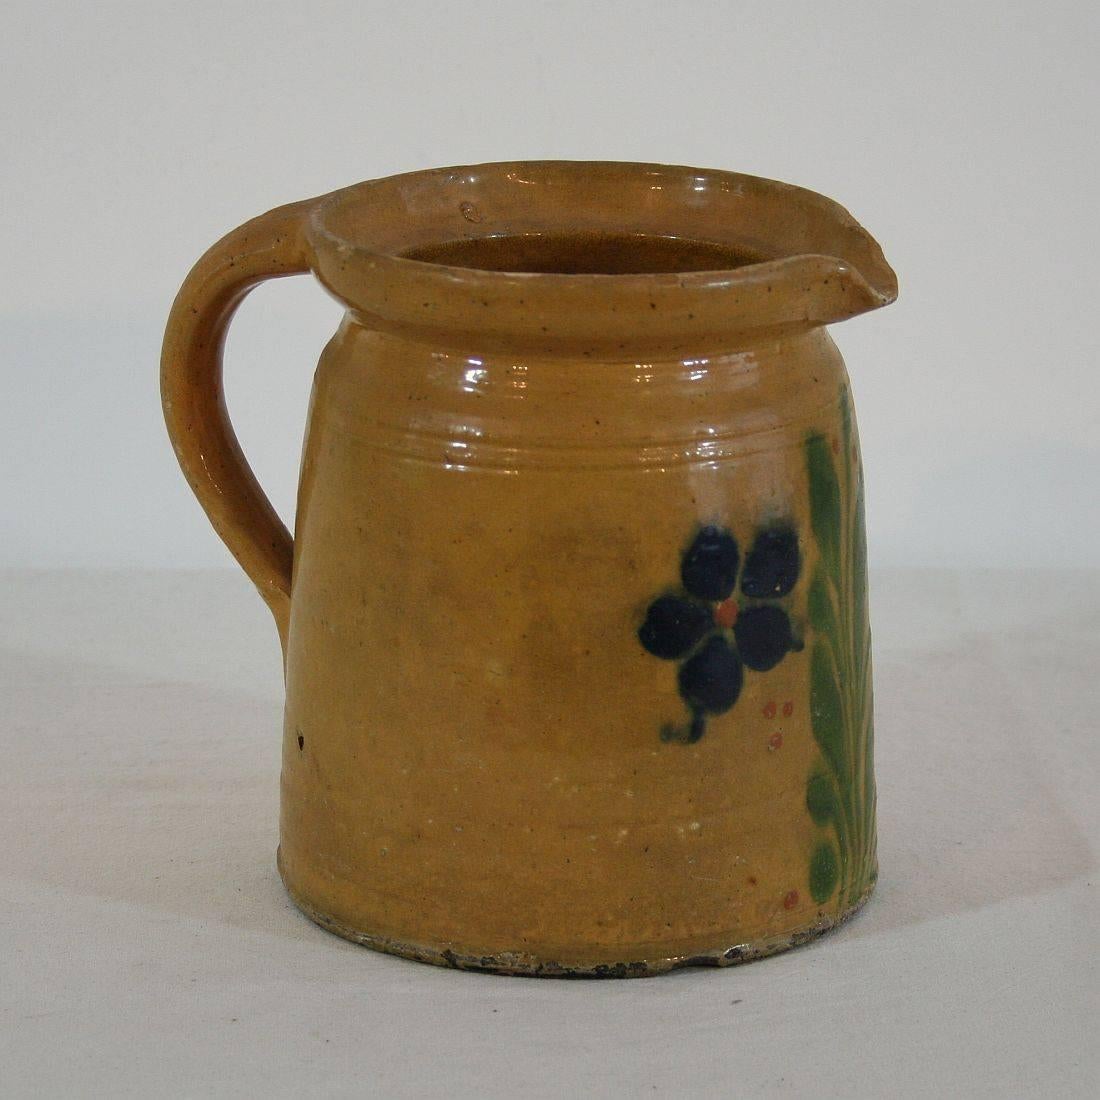 Typical Alsace pottery with its beautiful color and decoration,
France, circa 1850.
Good condition.